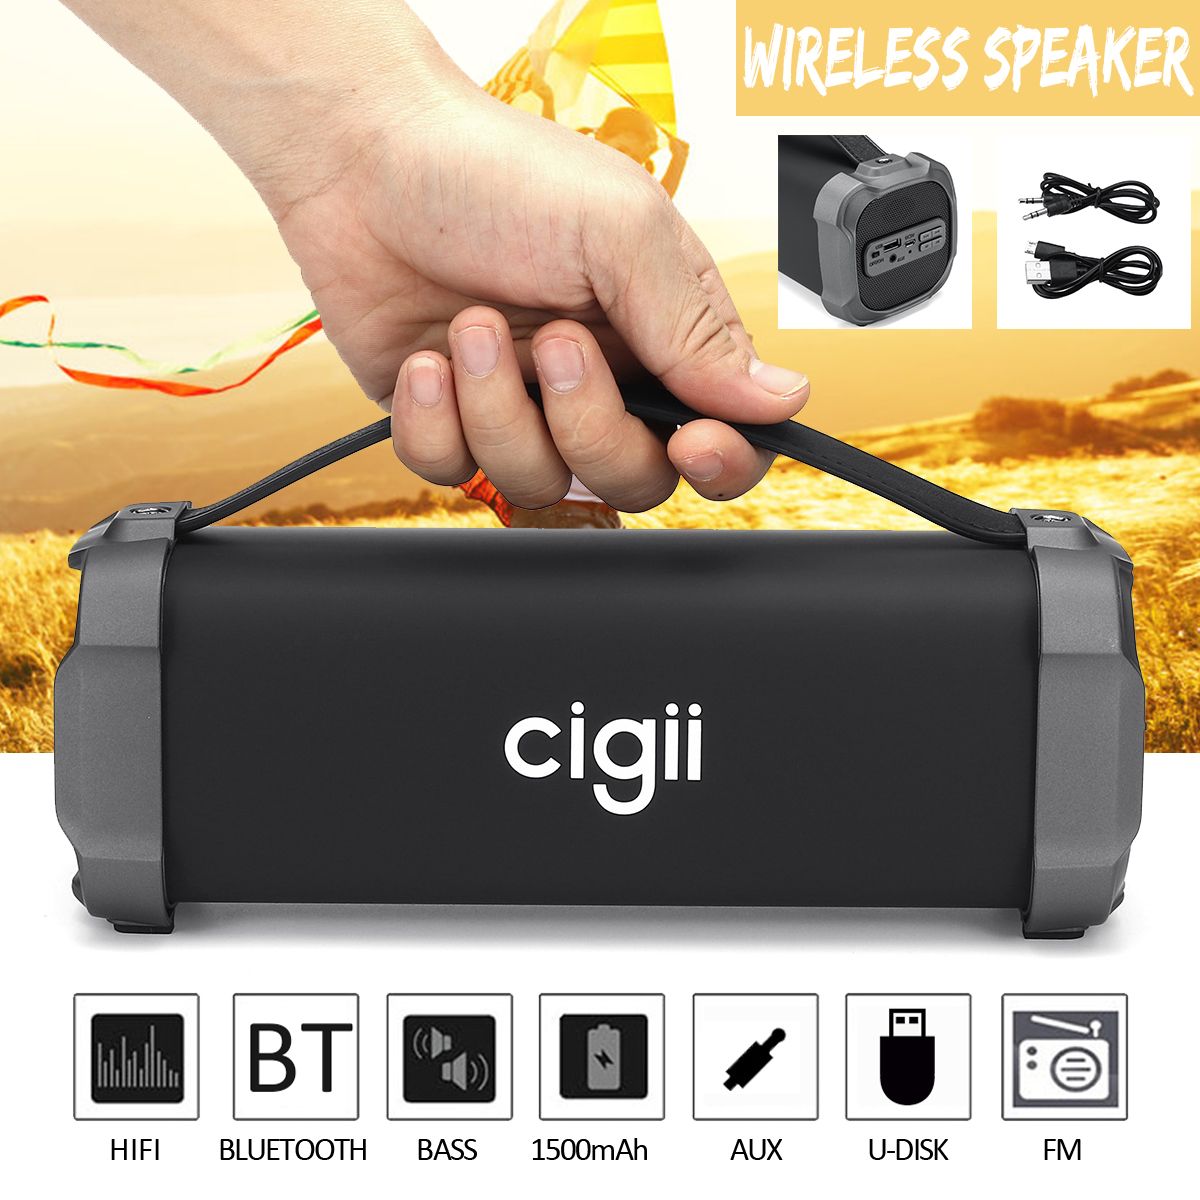 Portable-Wireless-Player-bluetooth-Audio-Speaker-HIFI-Bass-Surround-Sound-With-Mic-Support-AUX-FM-US-1416349